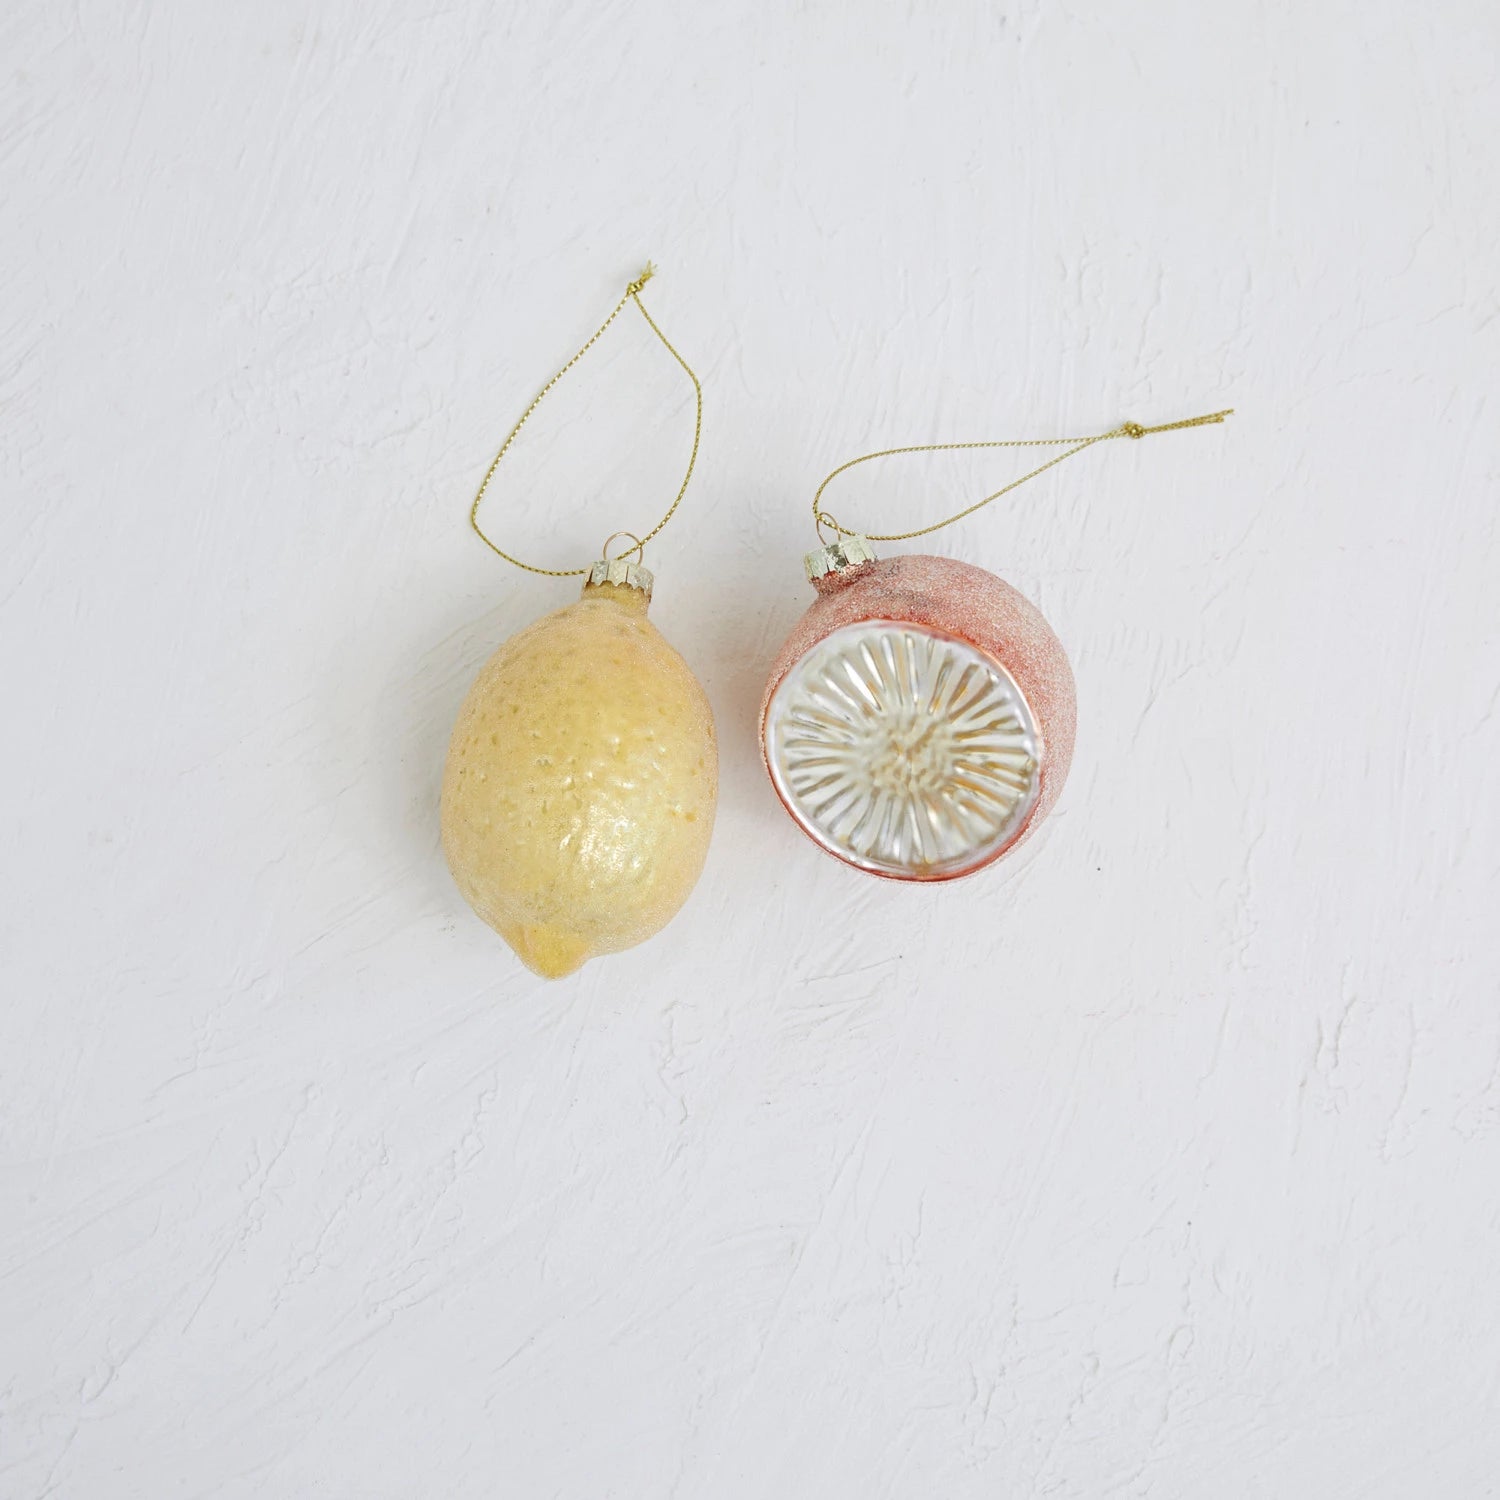 Hand-Painted Glass Lemon Ornament with Glitter